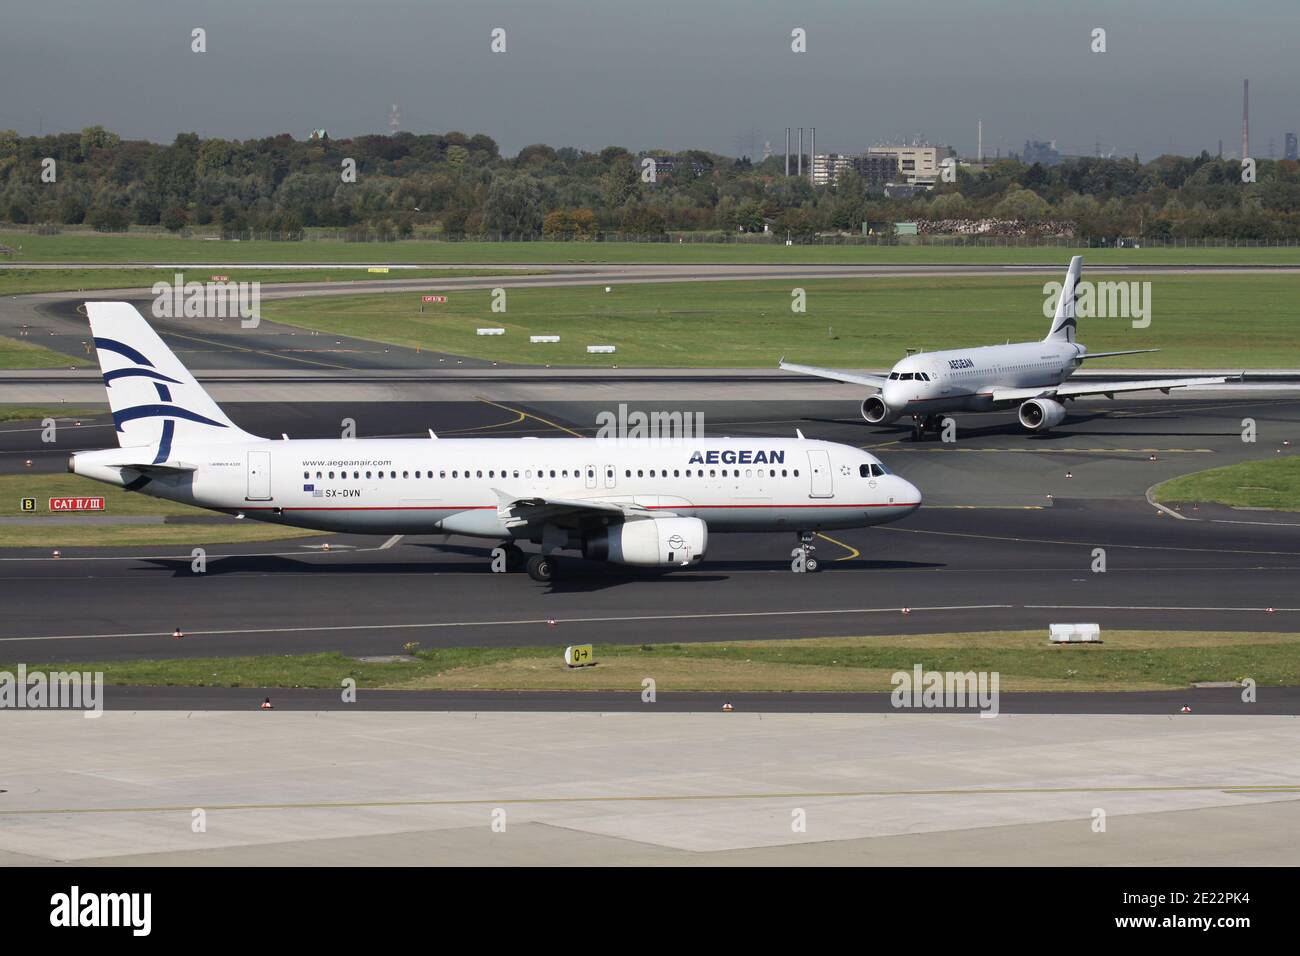 Greek Aegean Airlines Airbus A320-200 with registration SX-DVN together with SX-DVW on taxiway at Dusseldorf Airport. Stock Photo